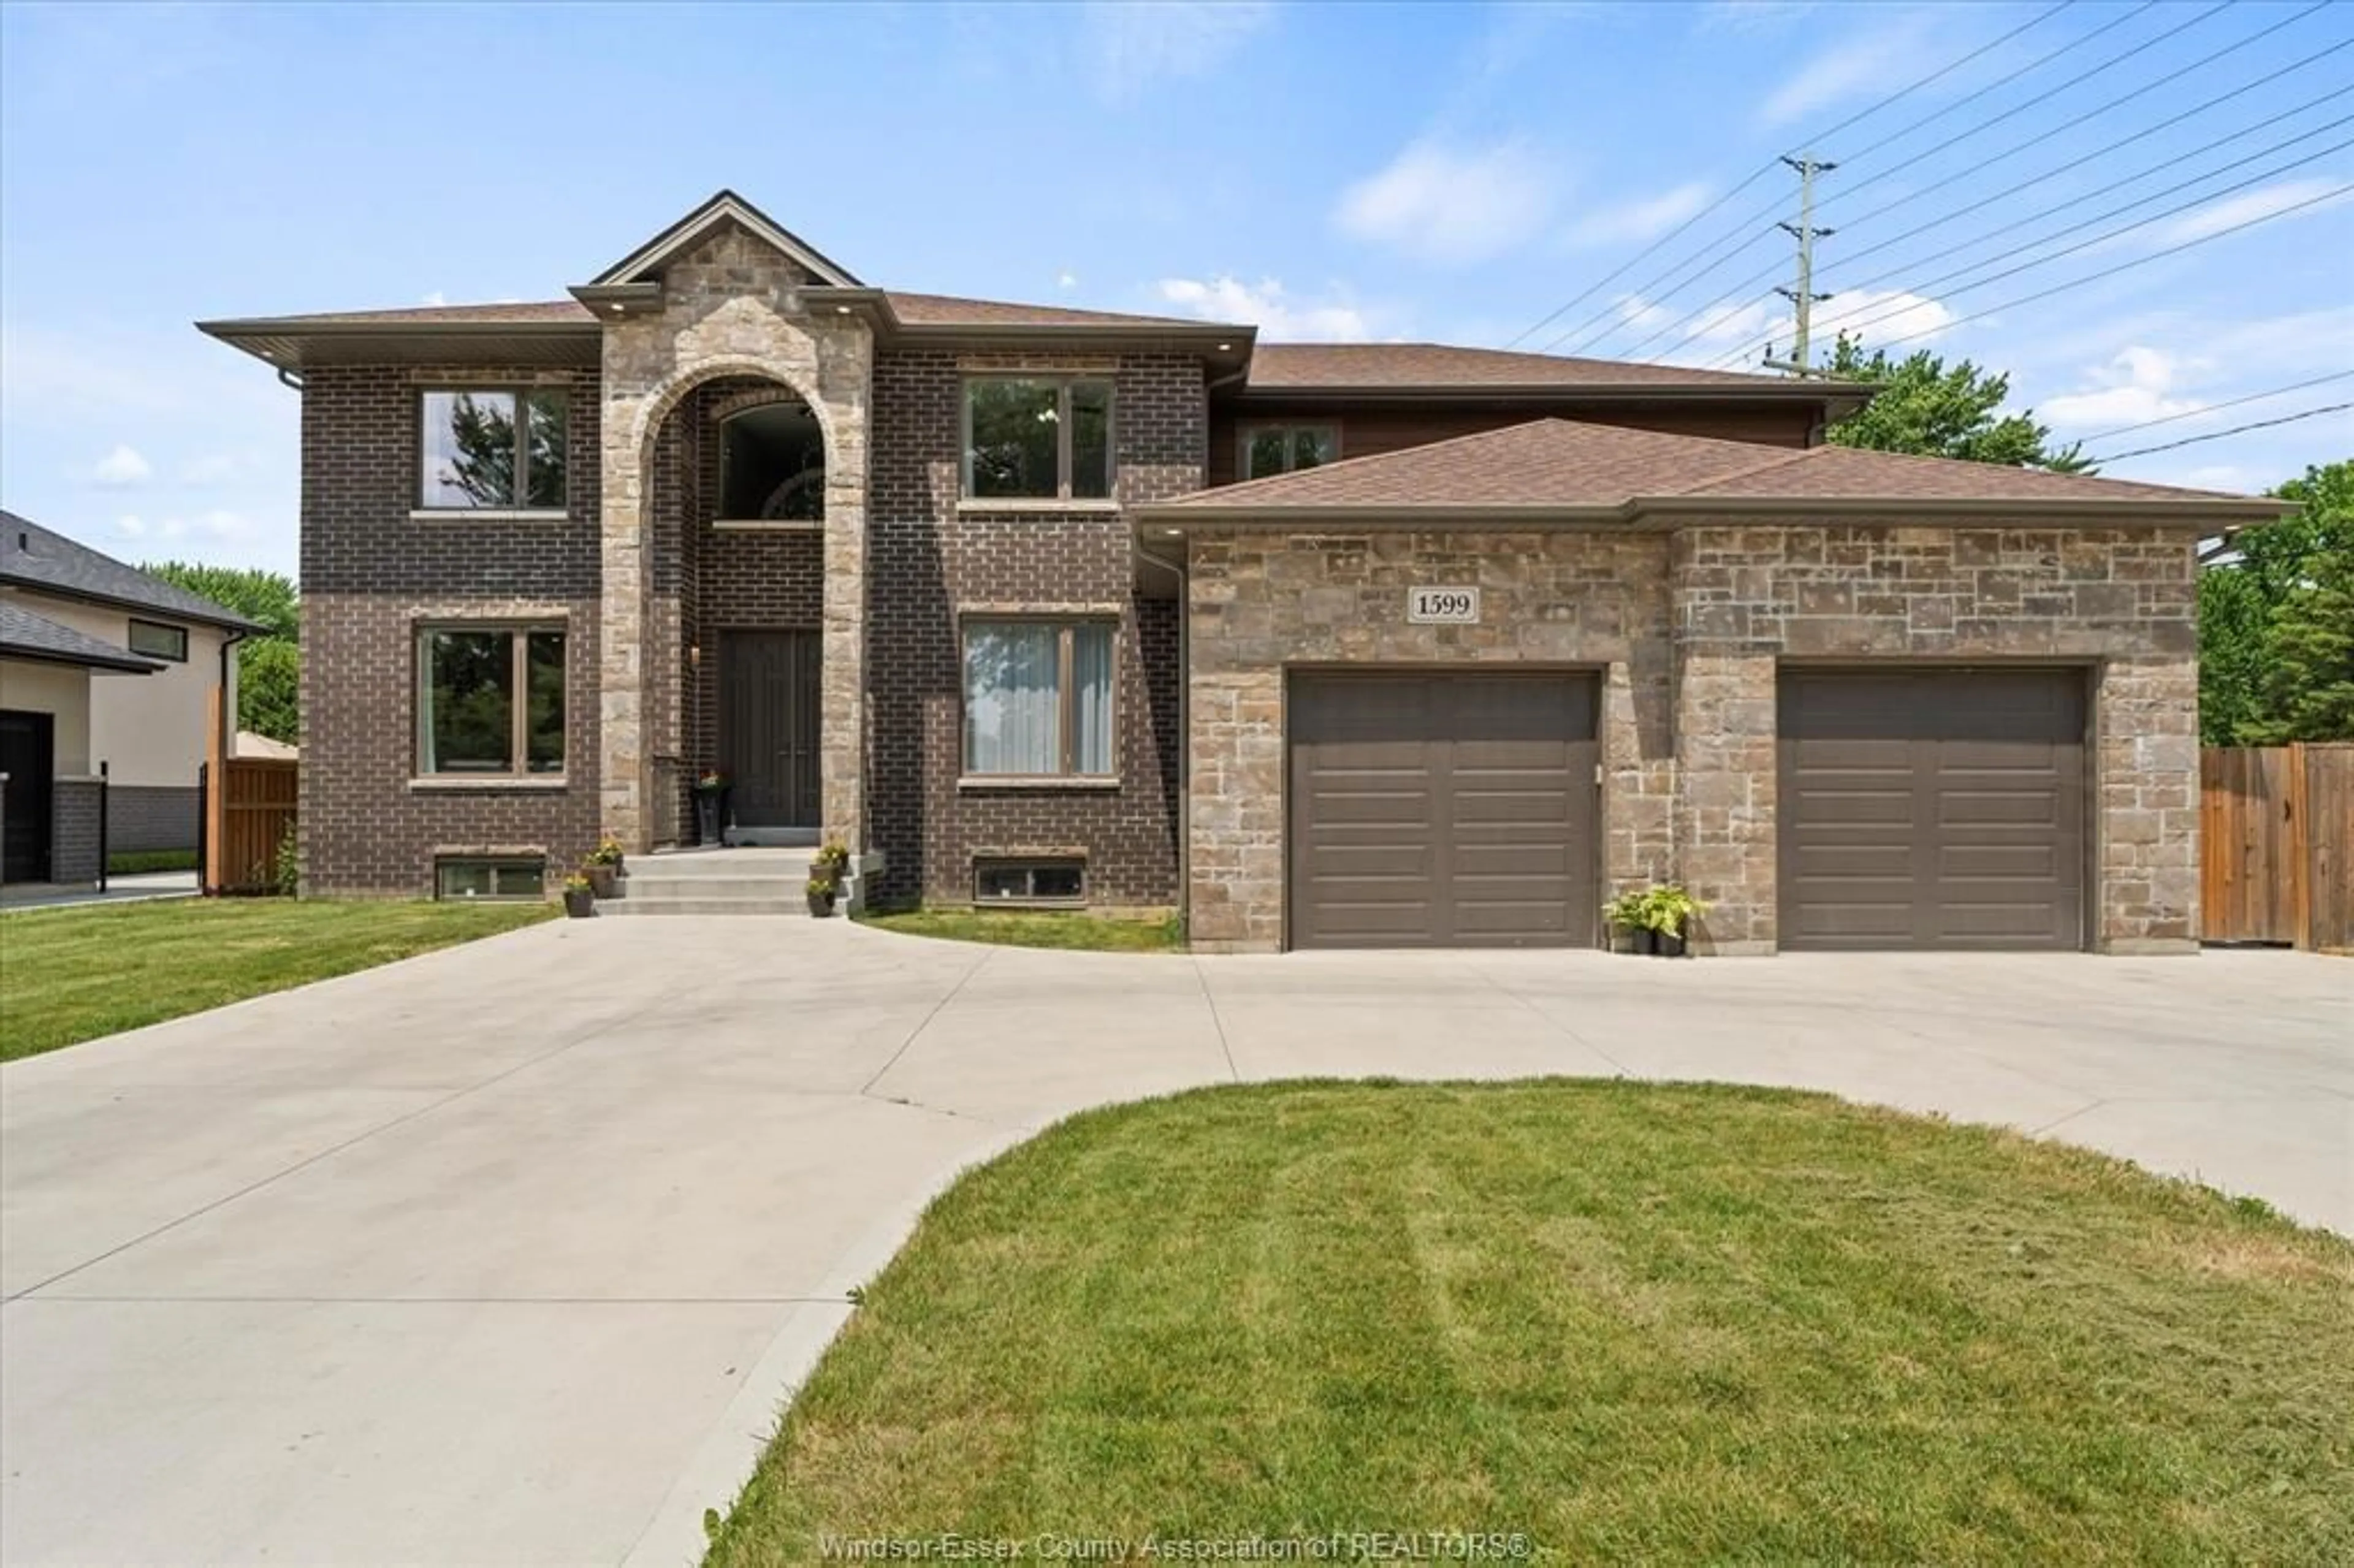 Home with brick exterior material for 1599 OUTRAM Ave, LaSalle Ontario N9J 3M3